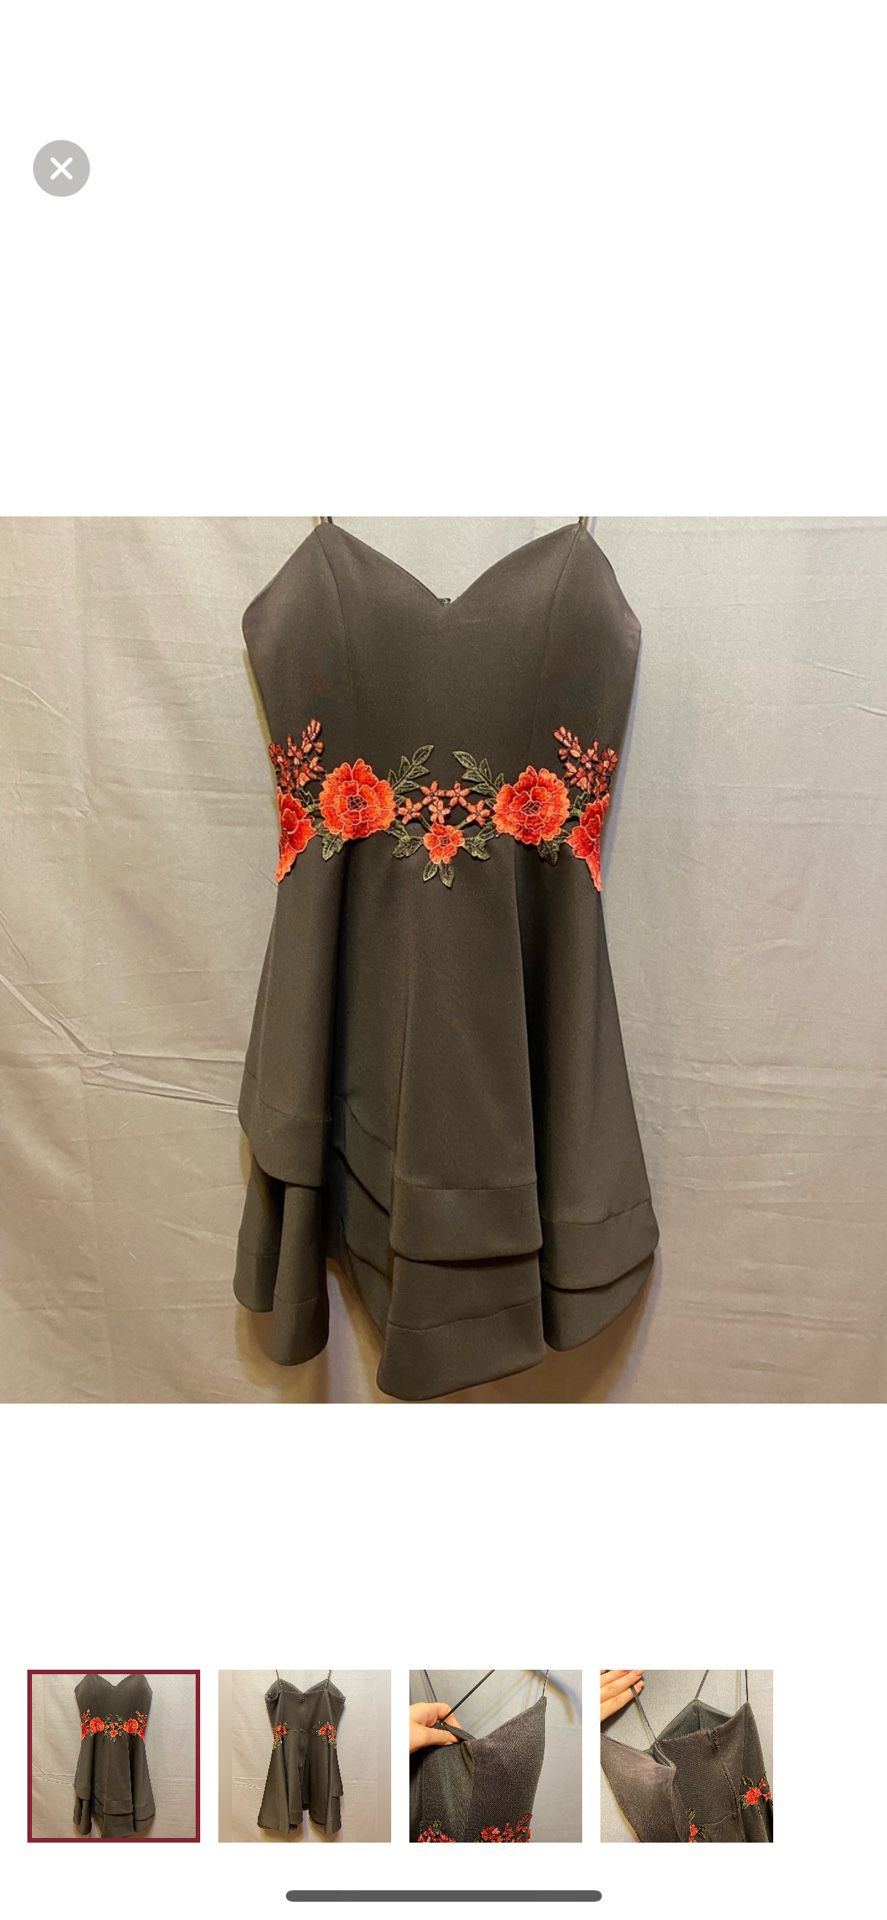 Black Dress with Floral Embroidery at the Waist, Size 7